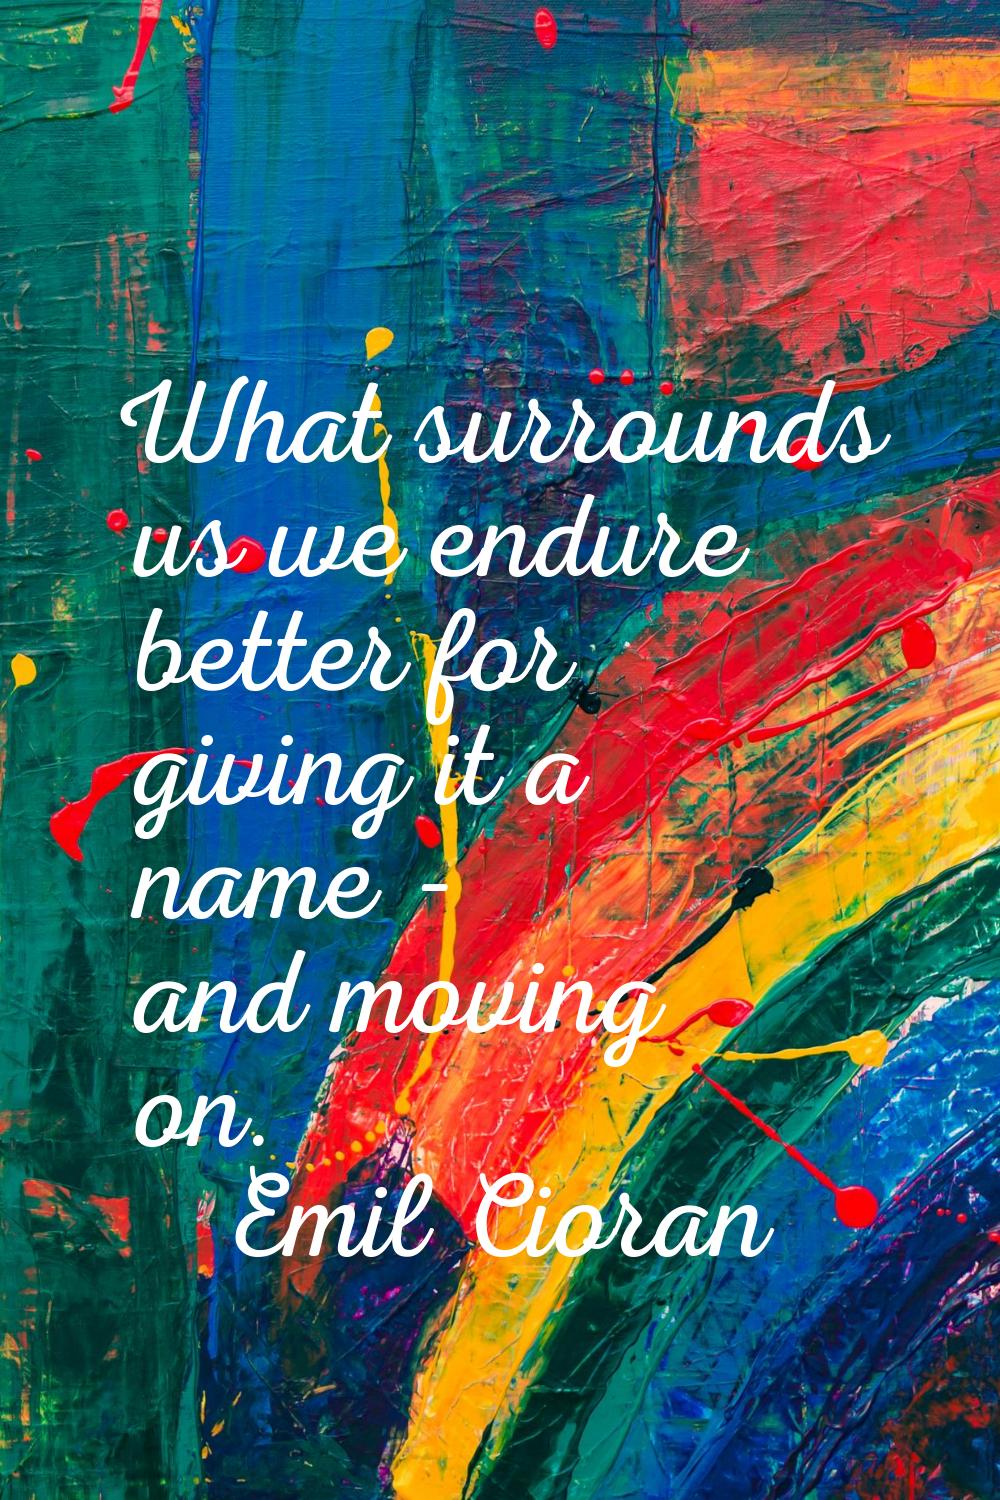 What surrounds us we endure better for giving it a name - and moving on.